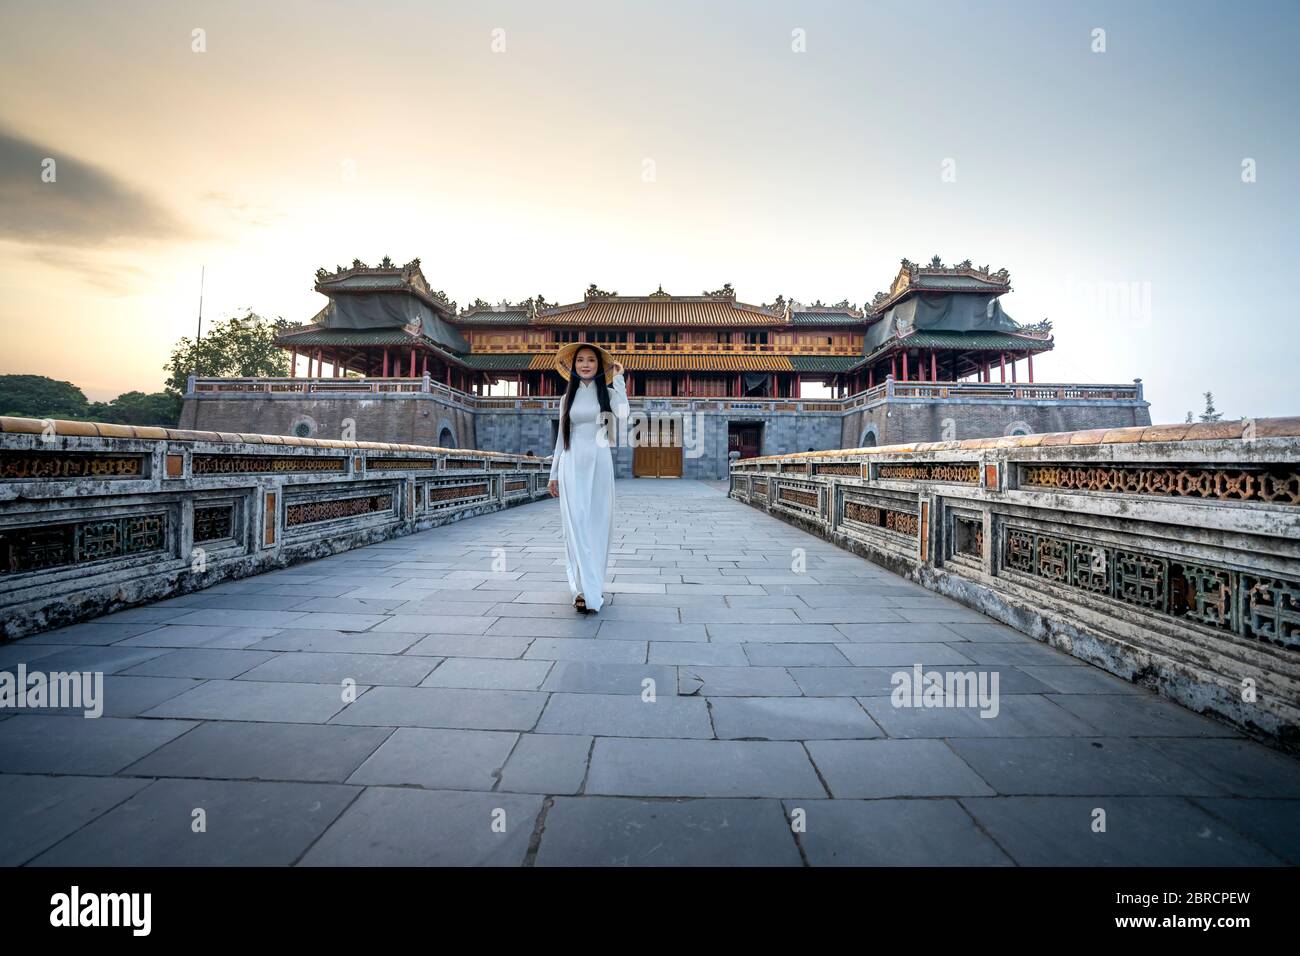 Hue City, Thua Thien Hue Province, Vietnam - May 7, 2020: Photo of a girl in a traditional ao dai costume inside a temple in Hue City, Thua Thien Hue Stock Photo